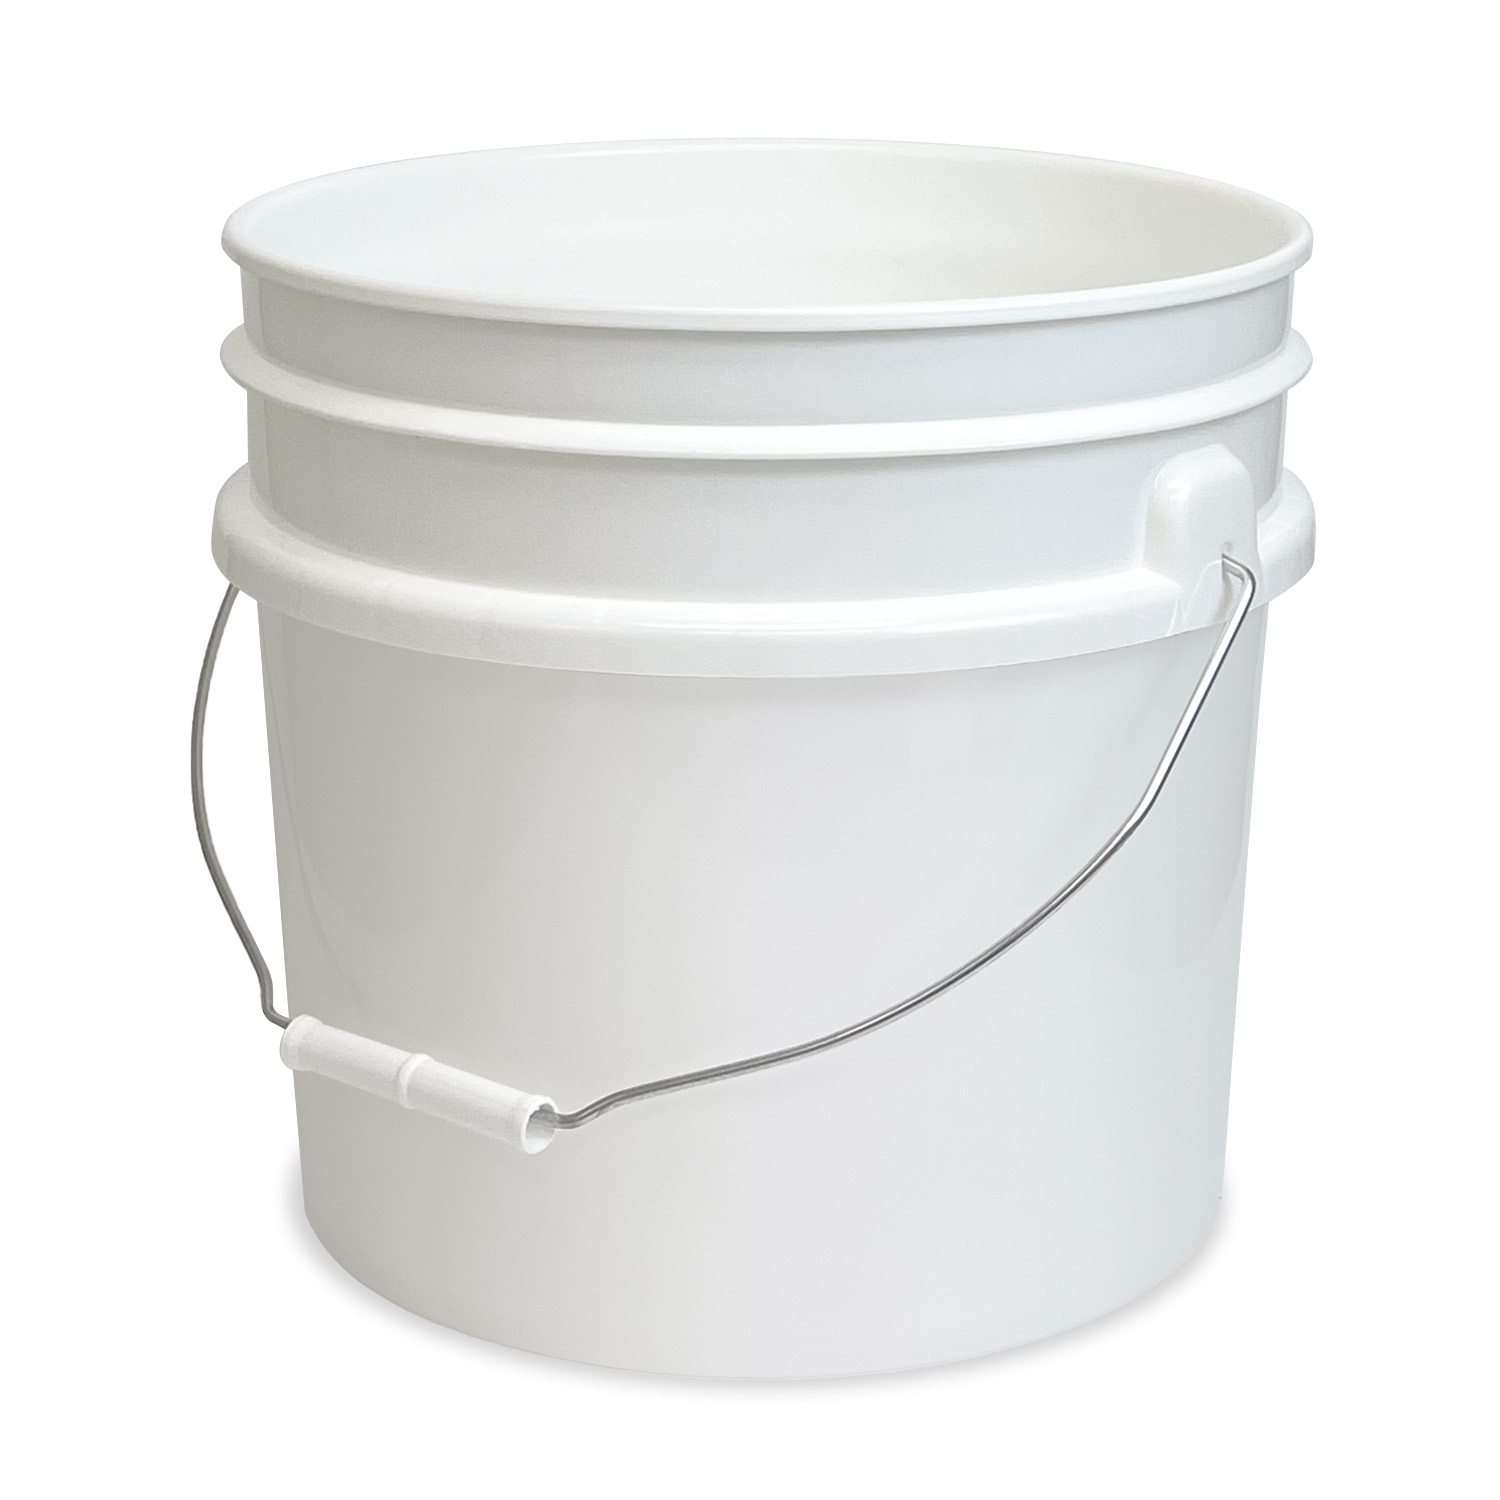 4 Gallon BPA Free Food Grade White Bucket with Plastic Handle - WITHOUT LID  - FREE SHIPPING - ePackageSupply